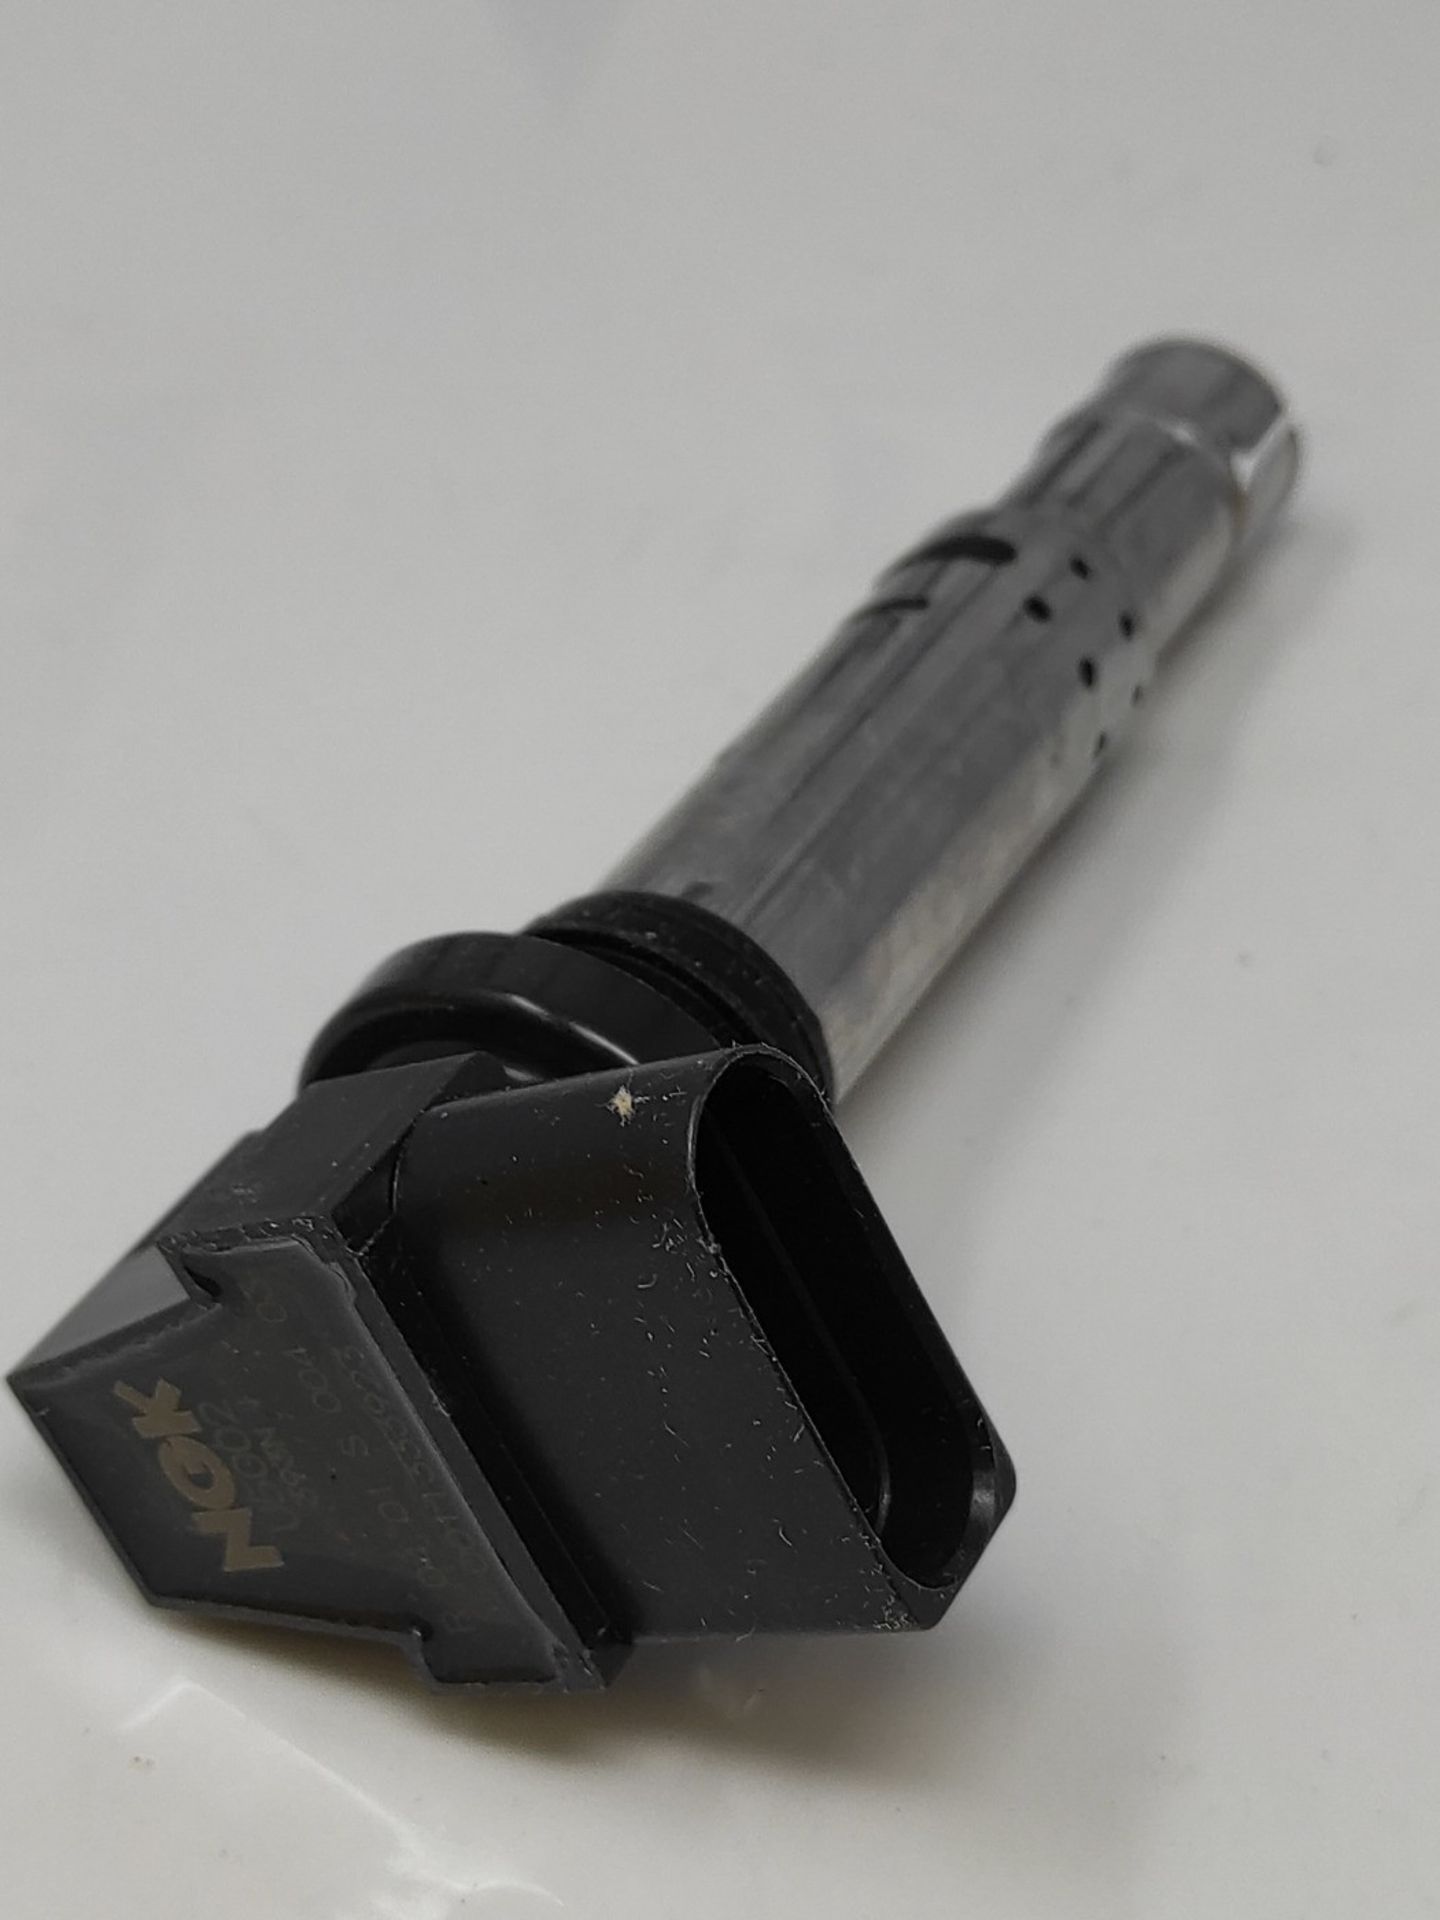 NGK 48003 Ignition Coil - Image 3 of 3